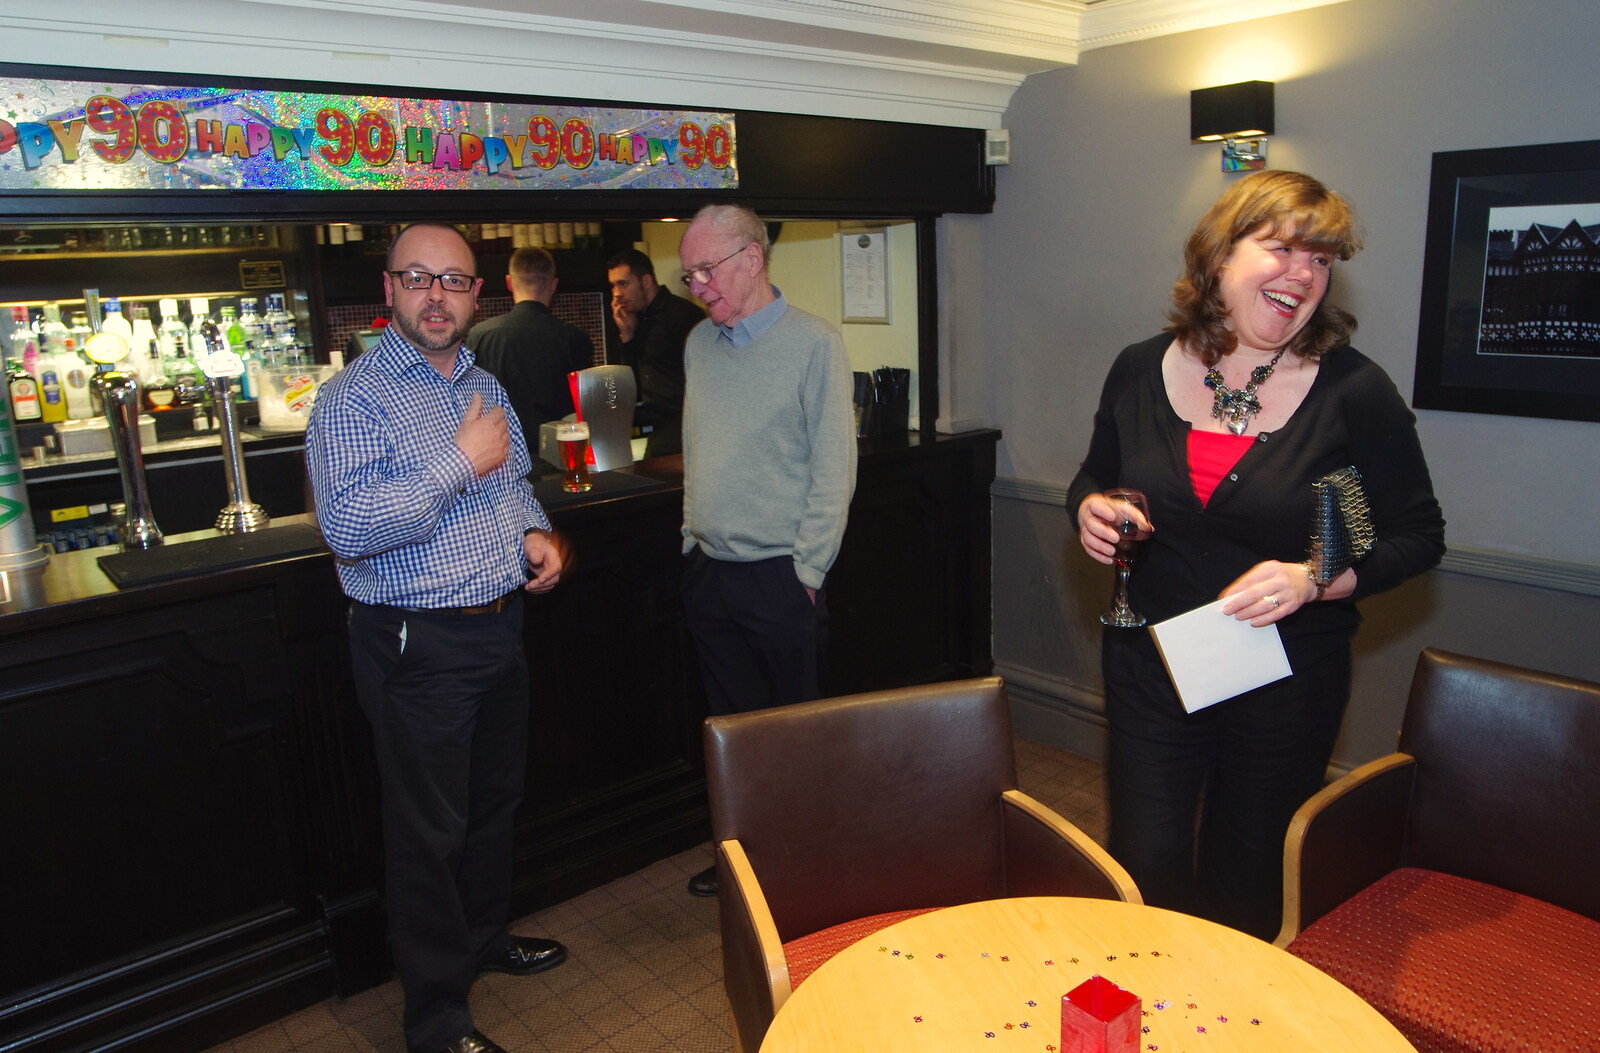 Matt, Grandad and Sis from Uncle James's Ninetieth Birthday, Cheadle Hulme, Manchester - 20th April 2013